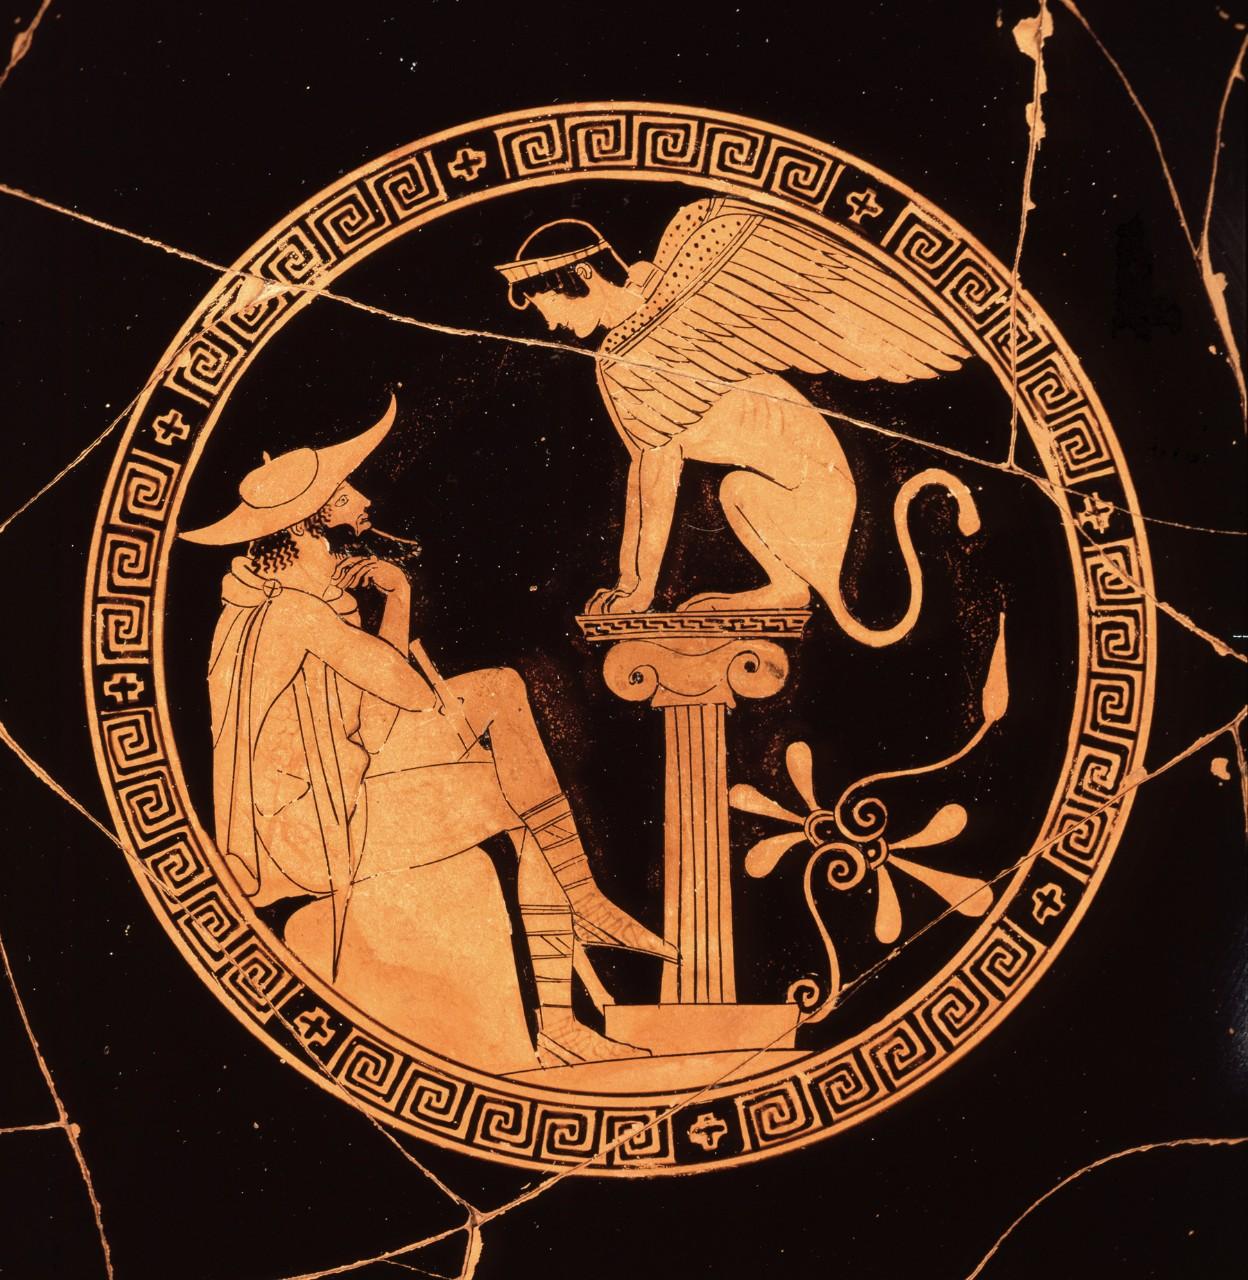 painting on pottery fragment showing Oedipus and the Sphinx facing each other